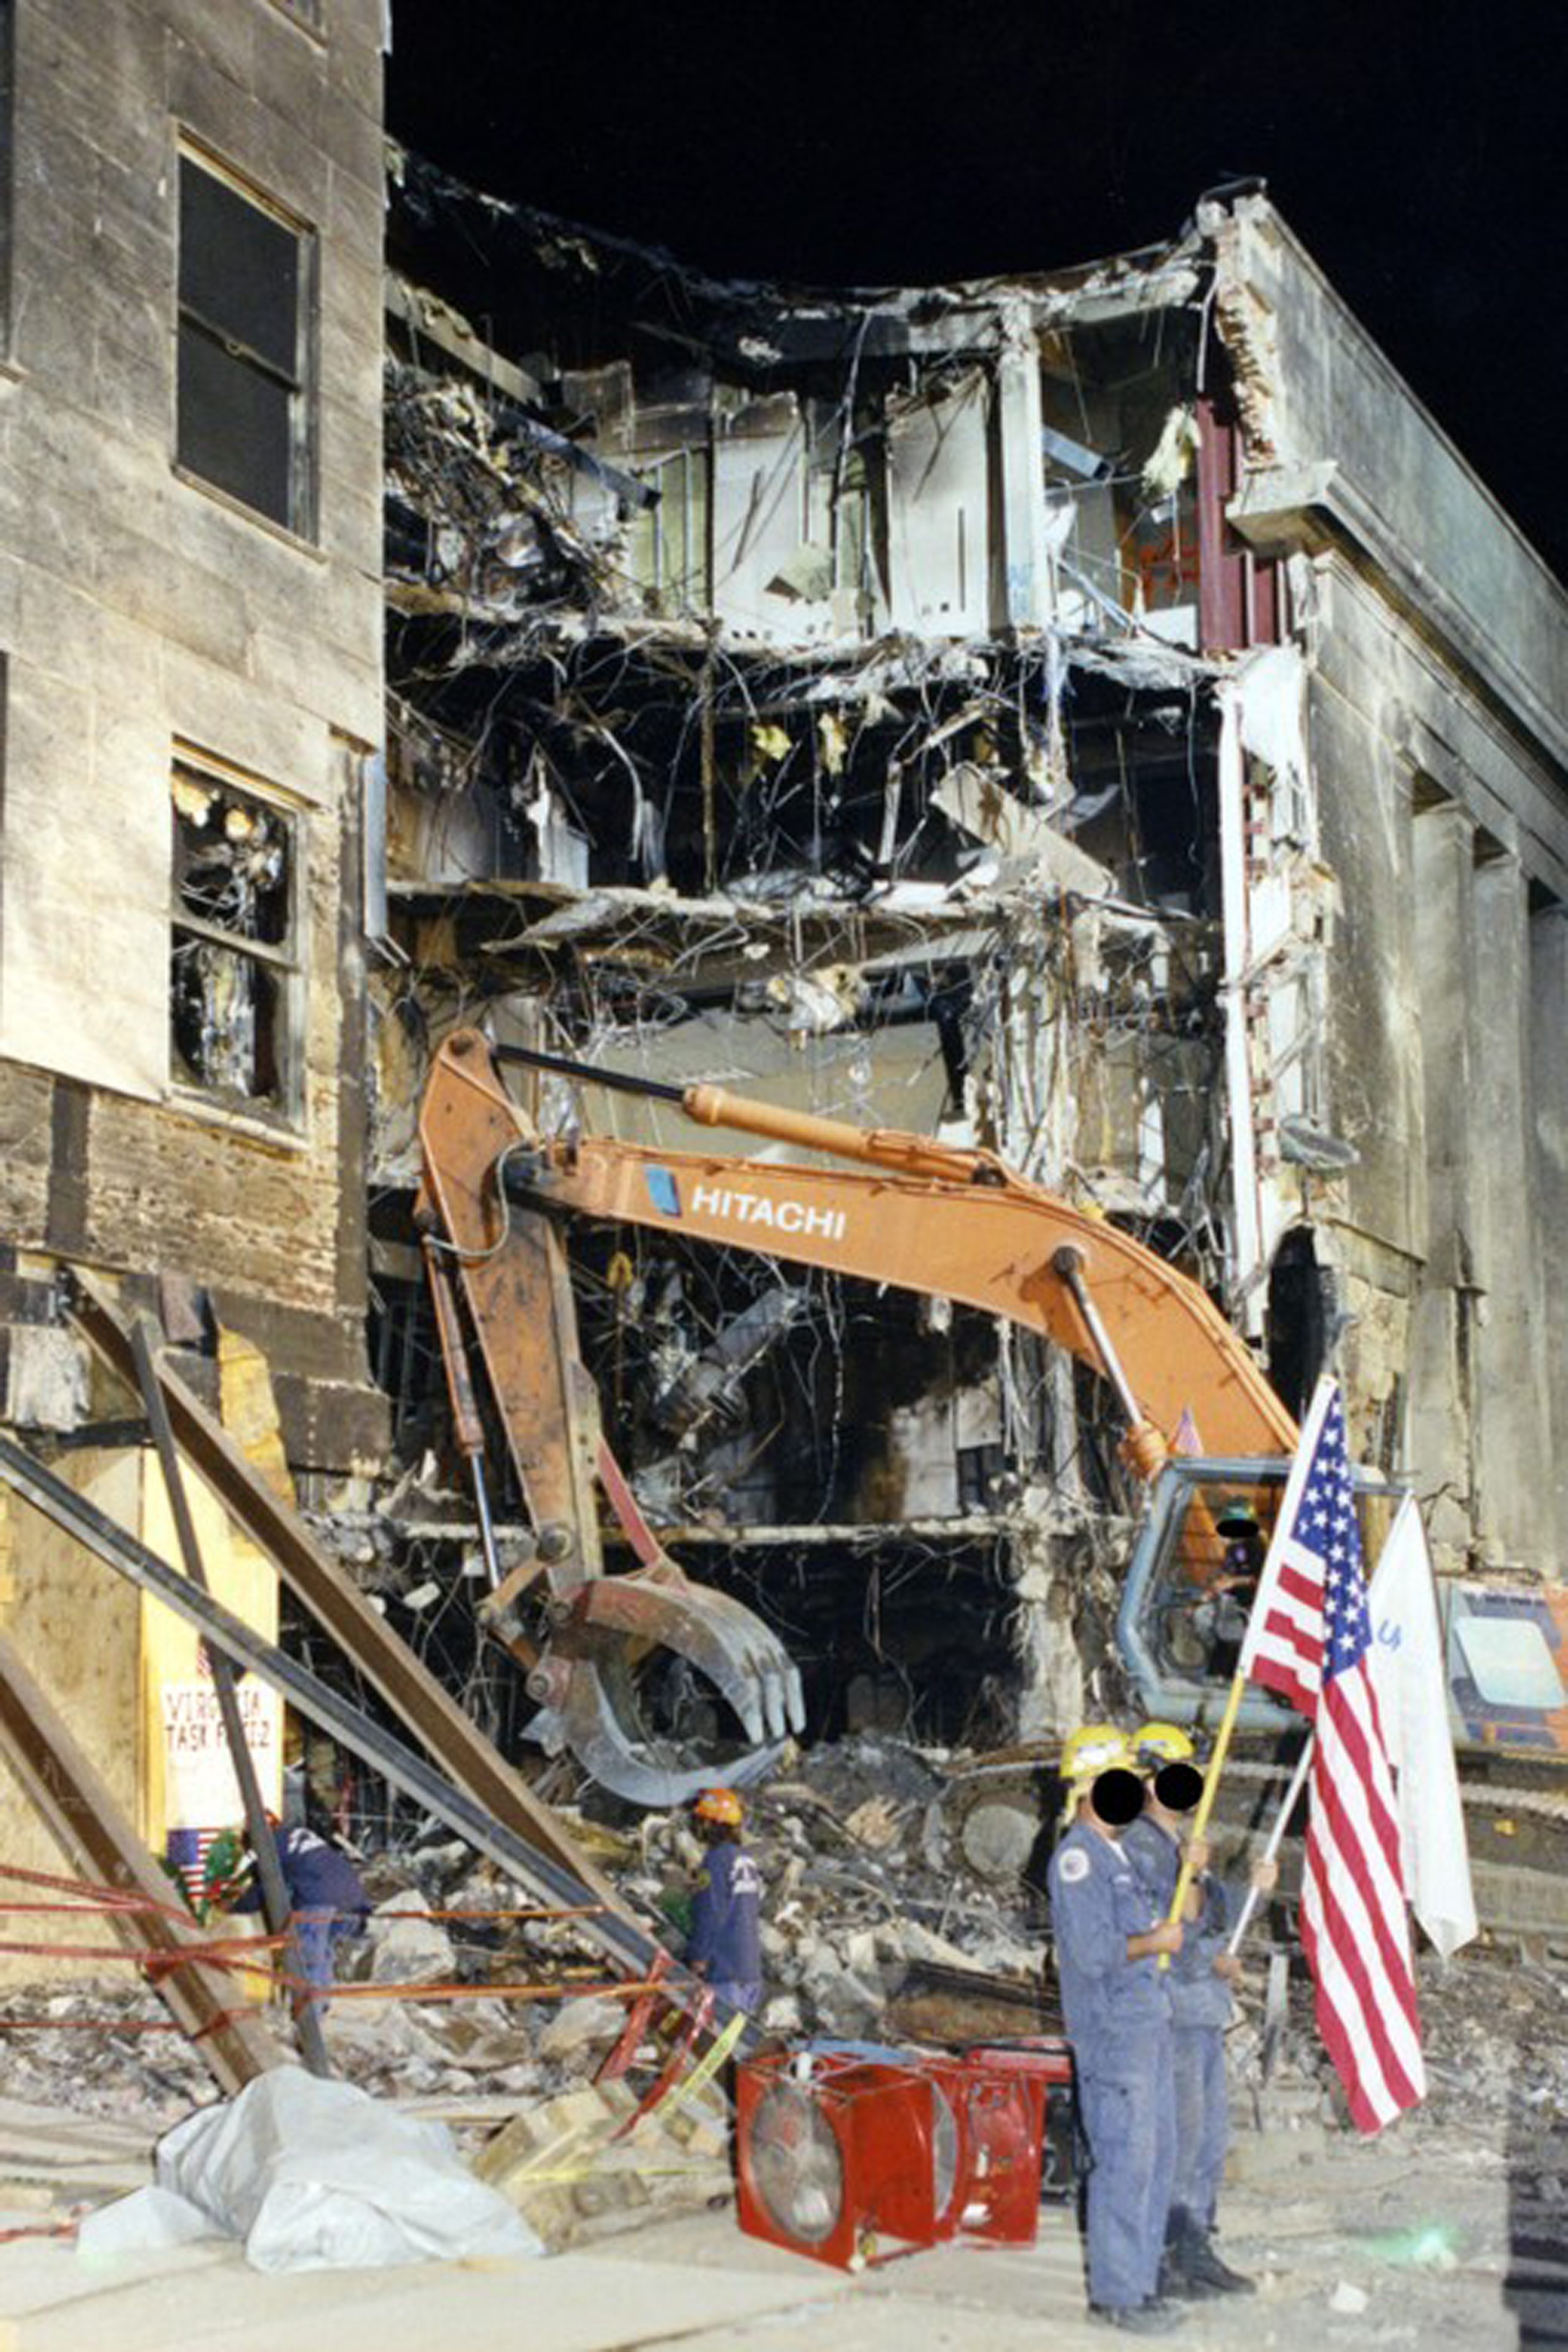 Members of the emergency services holding a US flag after the hijacked American Airlines Flight 77 crashed into the Pentagon in Arlington County, Virginia, on Sept. 11, 2001.